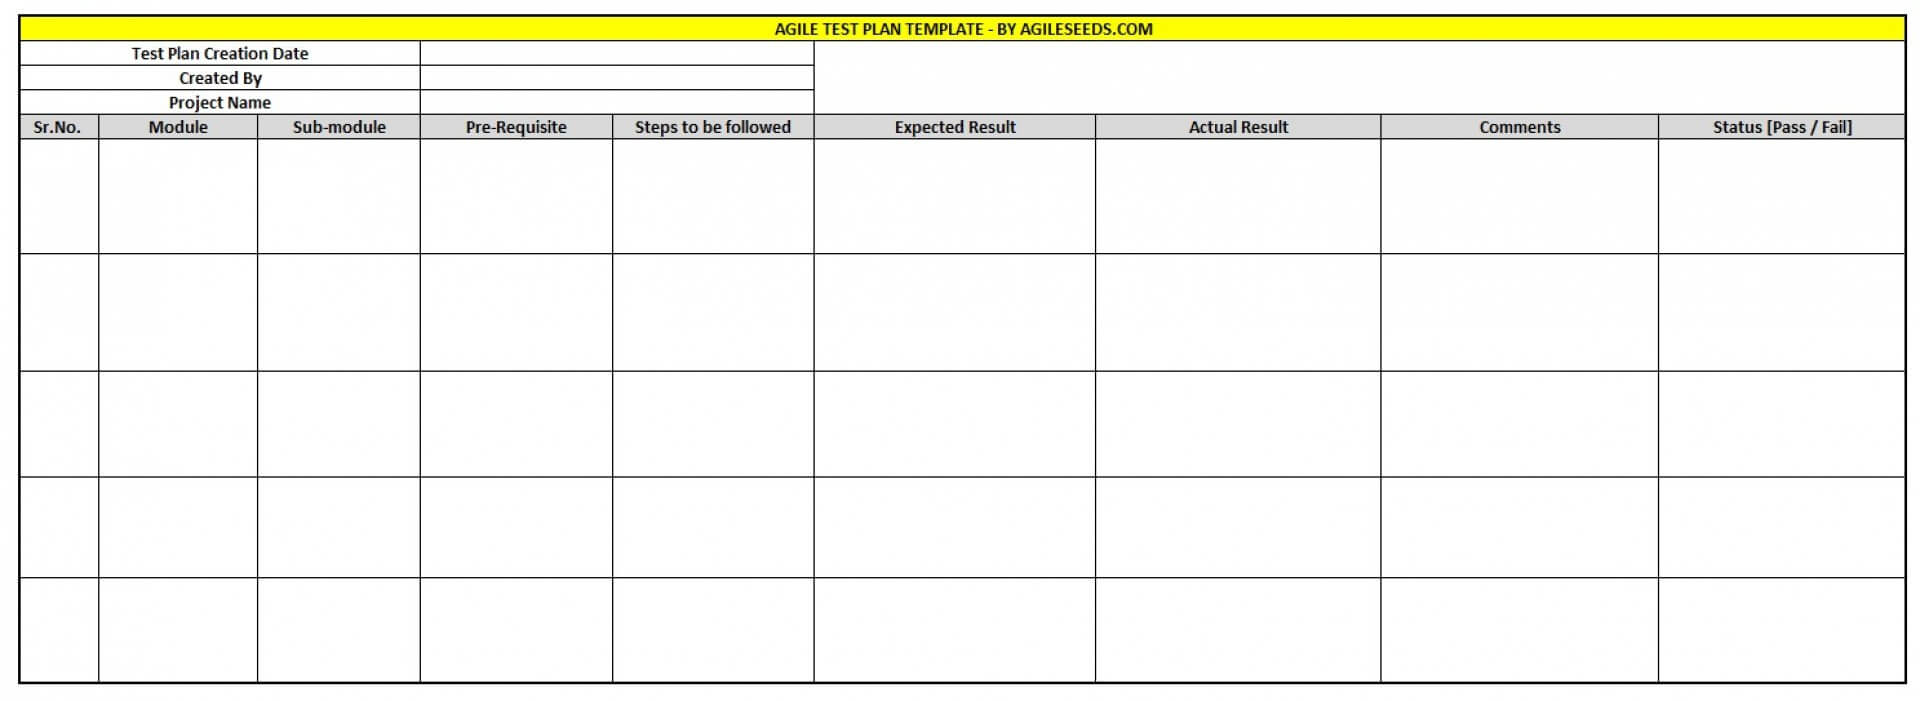 009 Ic Agile User Story Template 0 Test Plan Impressive Throughout User Story Template Word